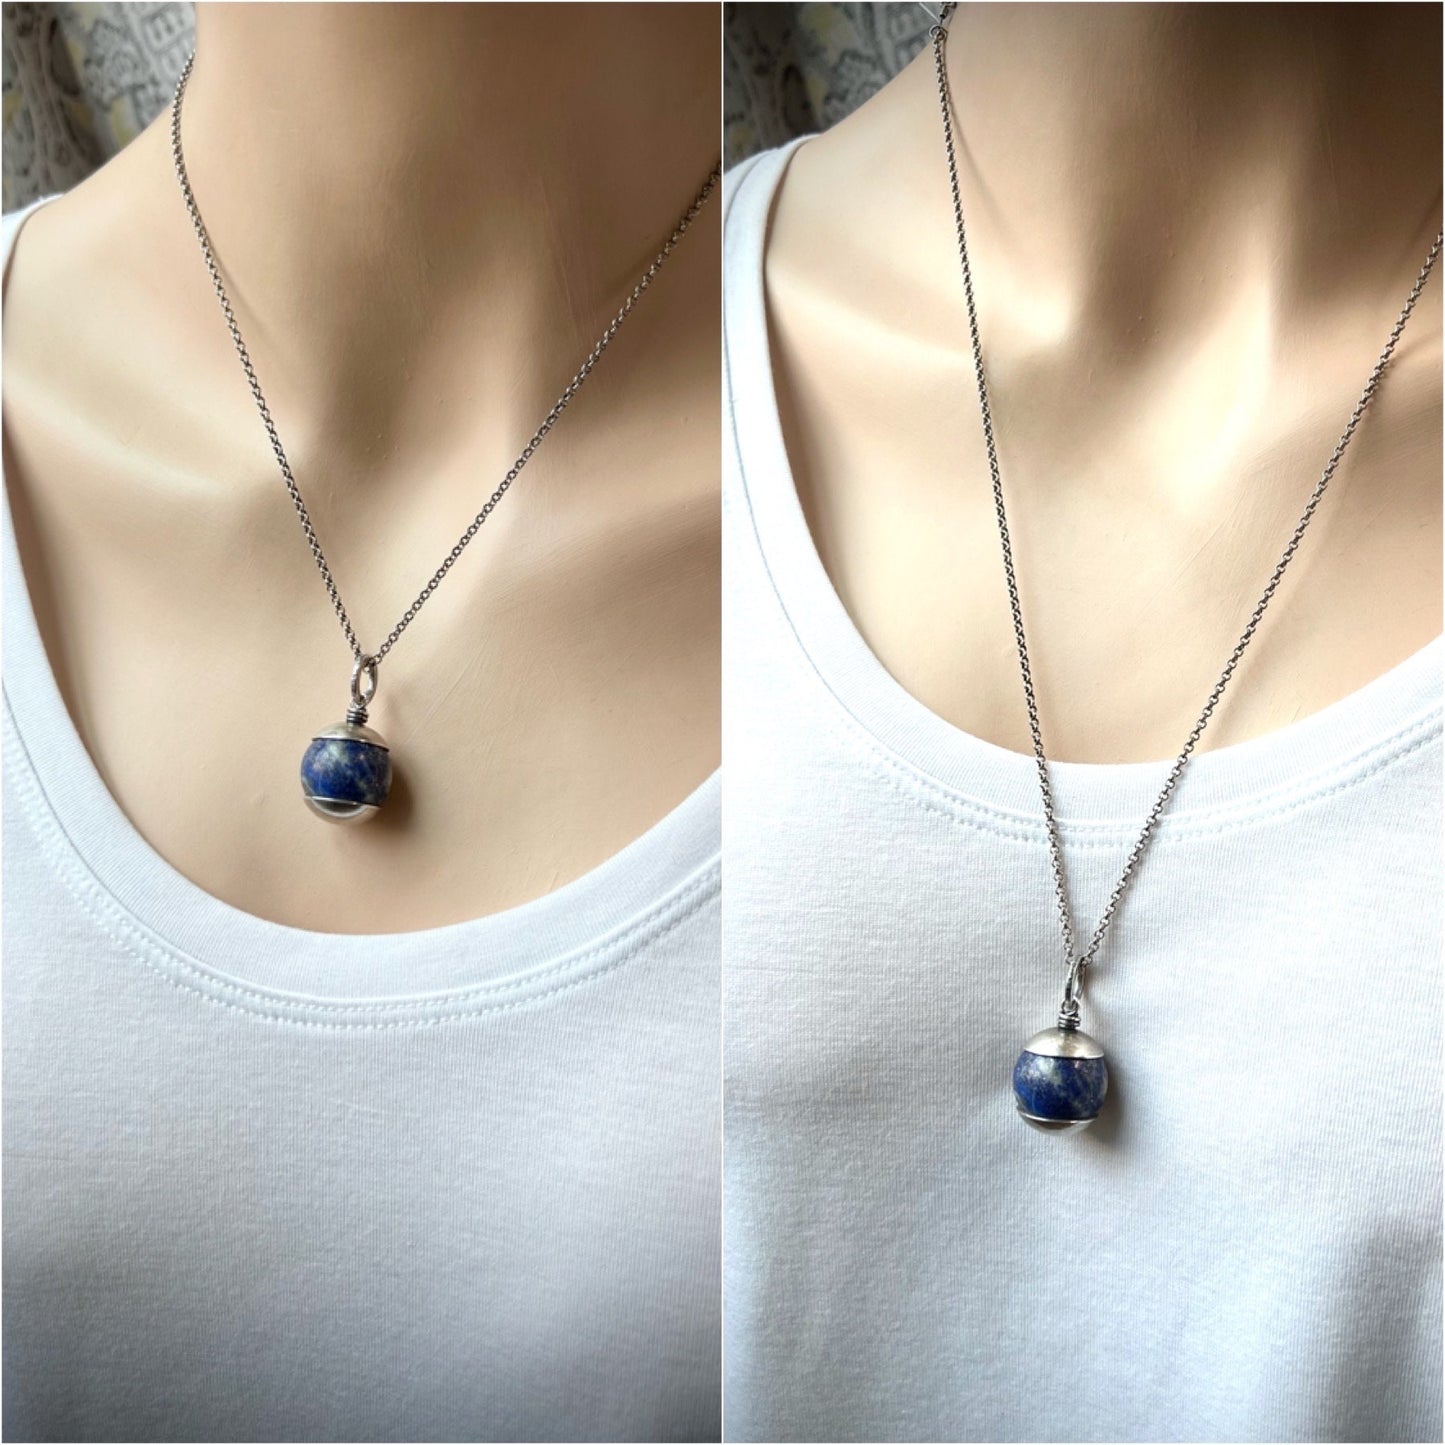 Lapis Lazuli Sterling Silver Necklace - Handmade Pendant on Sterling Silver Chain